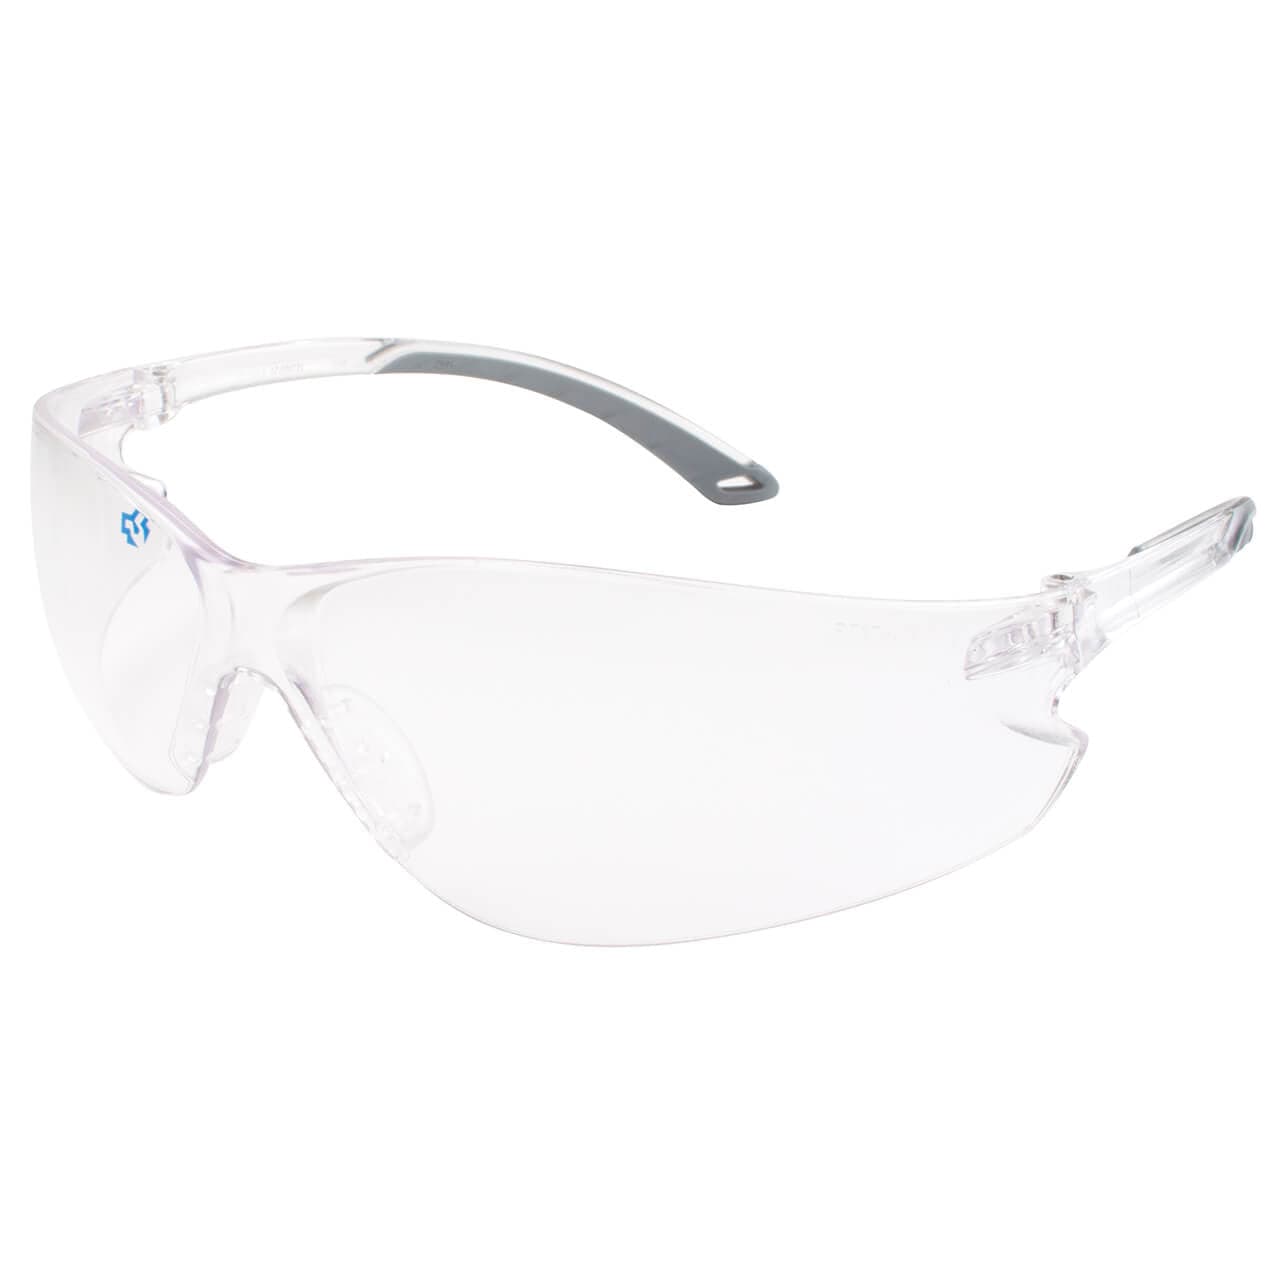 Metel M20 Safety Glasses with Clear Anti-Fog Lenses